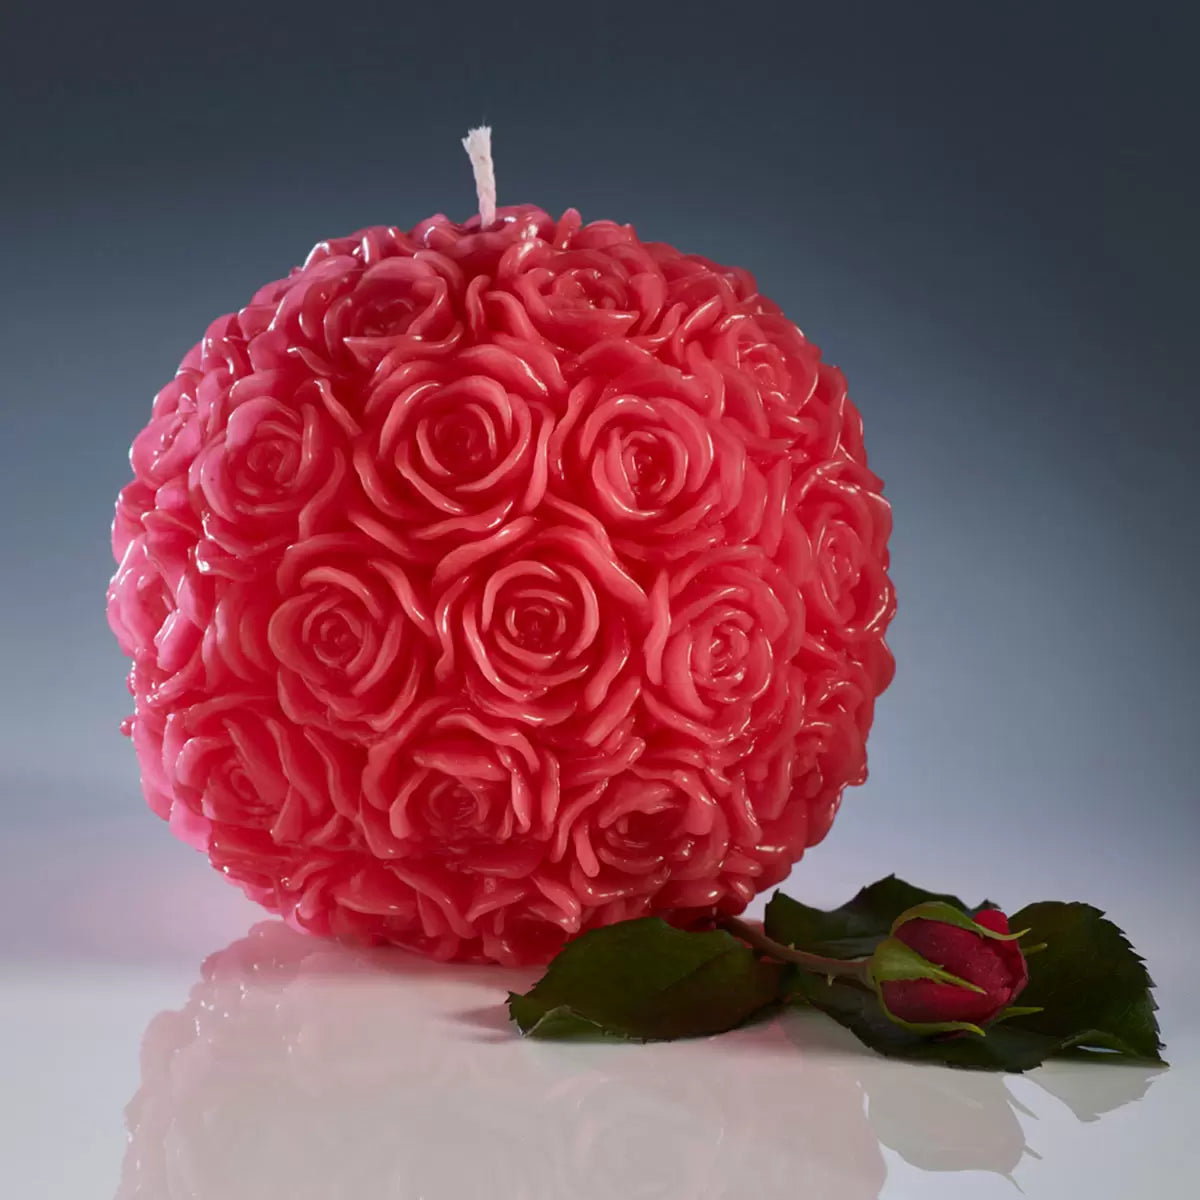 Refillable candle 90cm Dimension Rose Ball Unscented Candle.